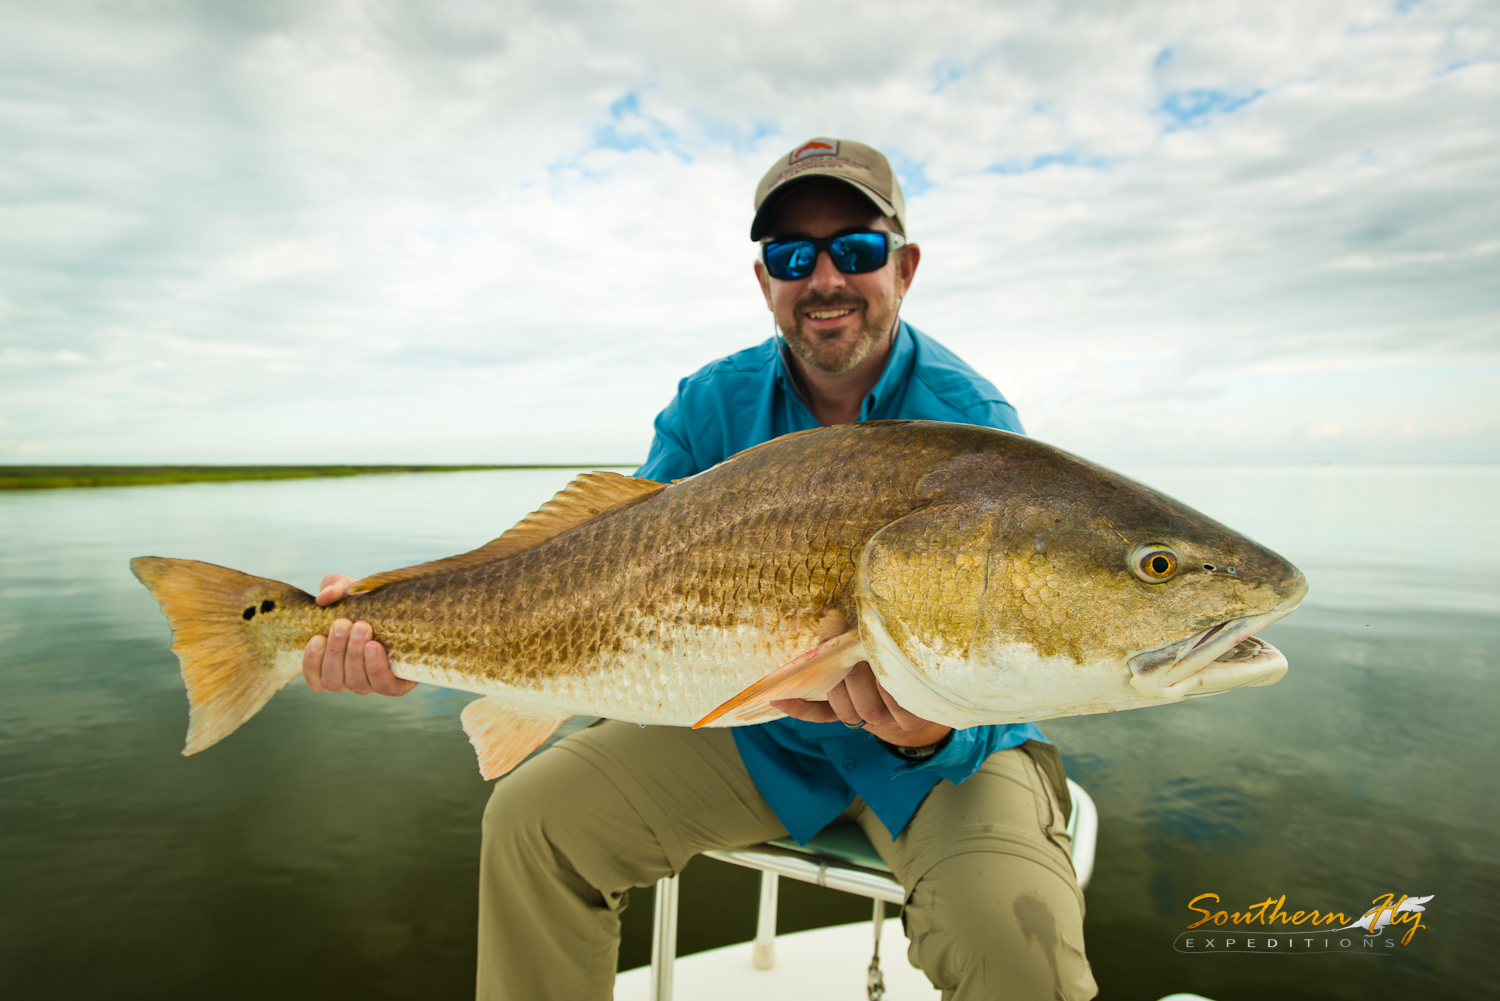 August Fly Fishing Photos - Southern Fly Expeditions and Captain Brandon Keck Fly Fishing Guide New Orleans 